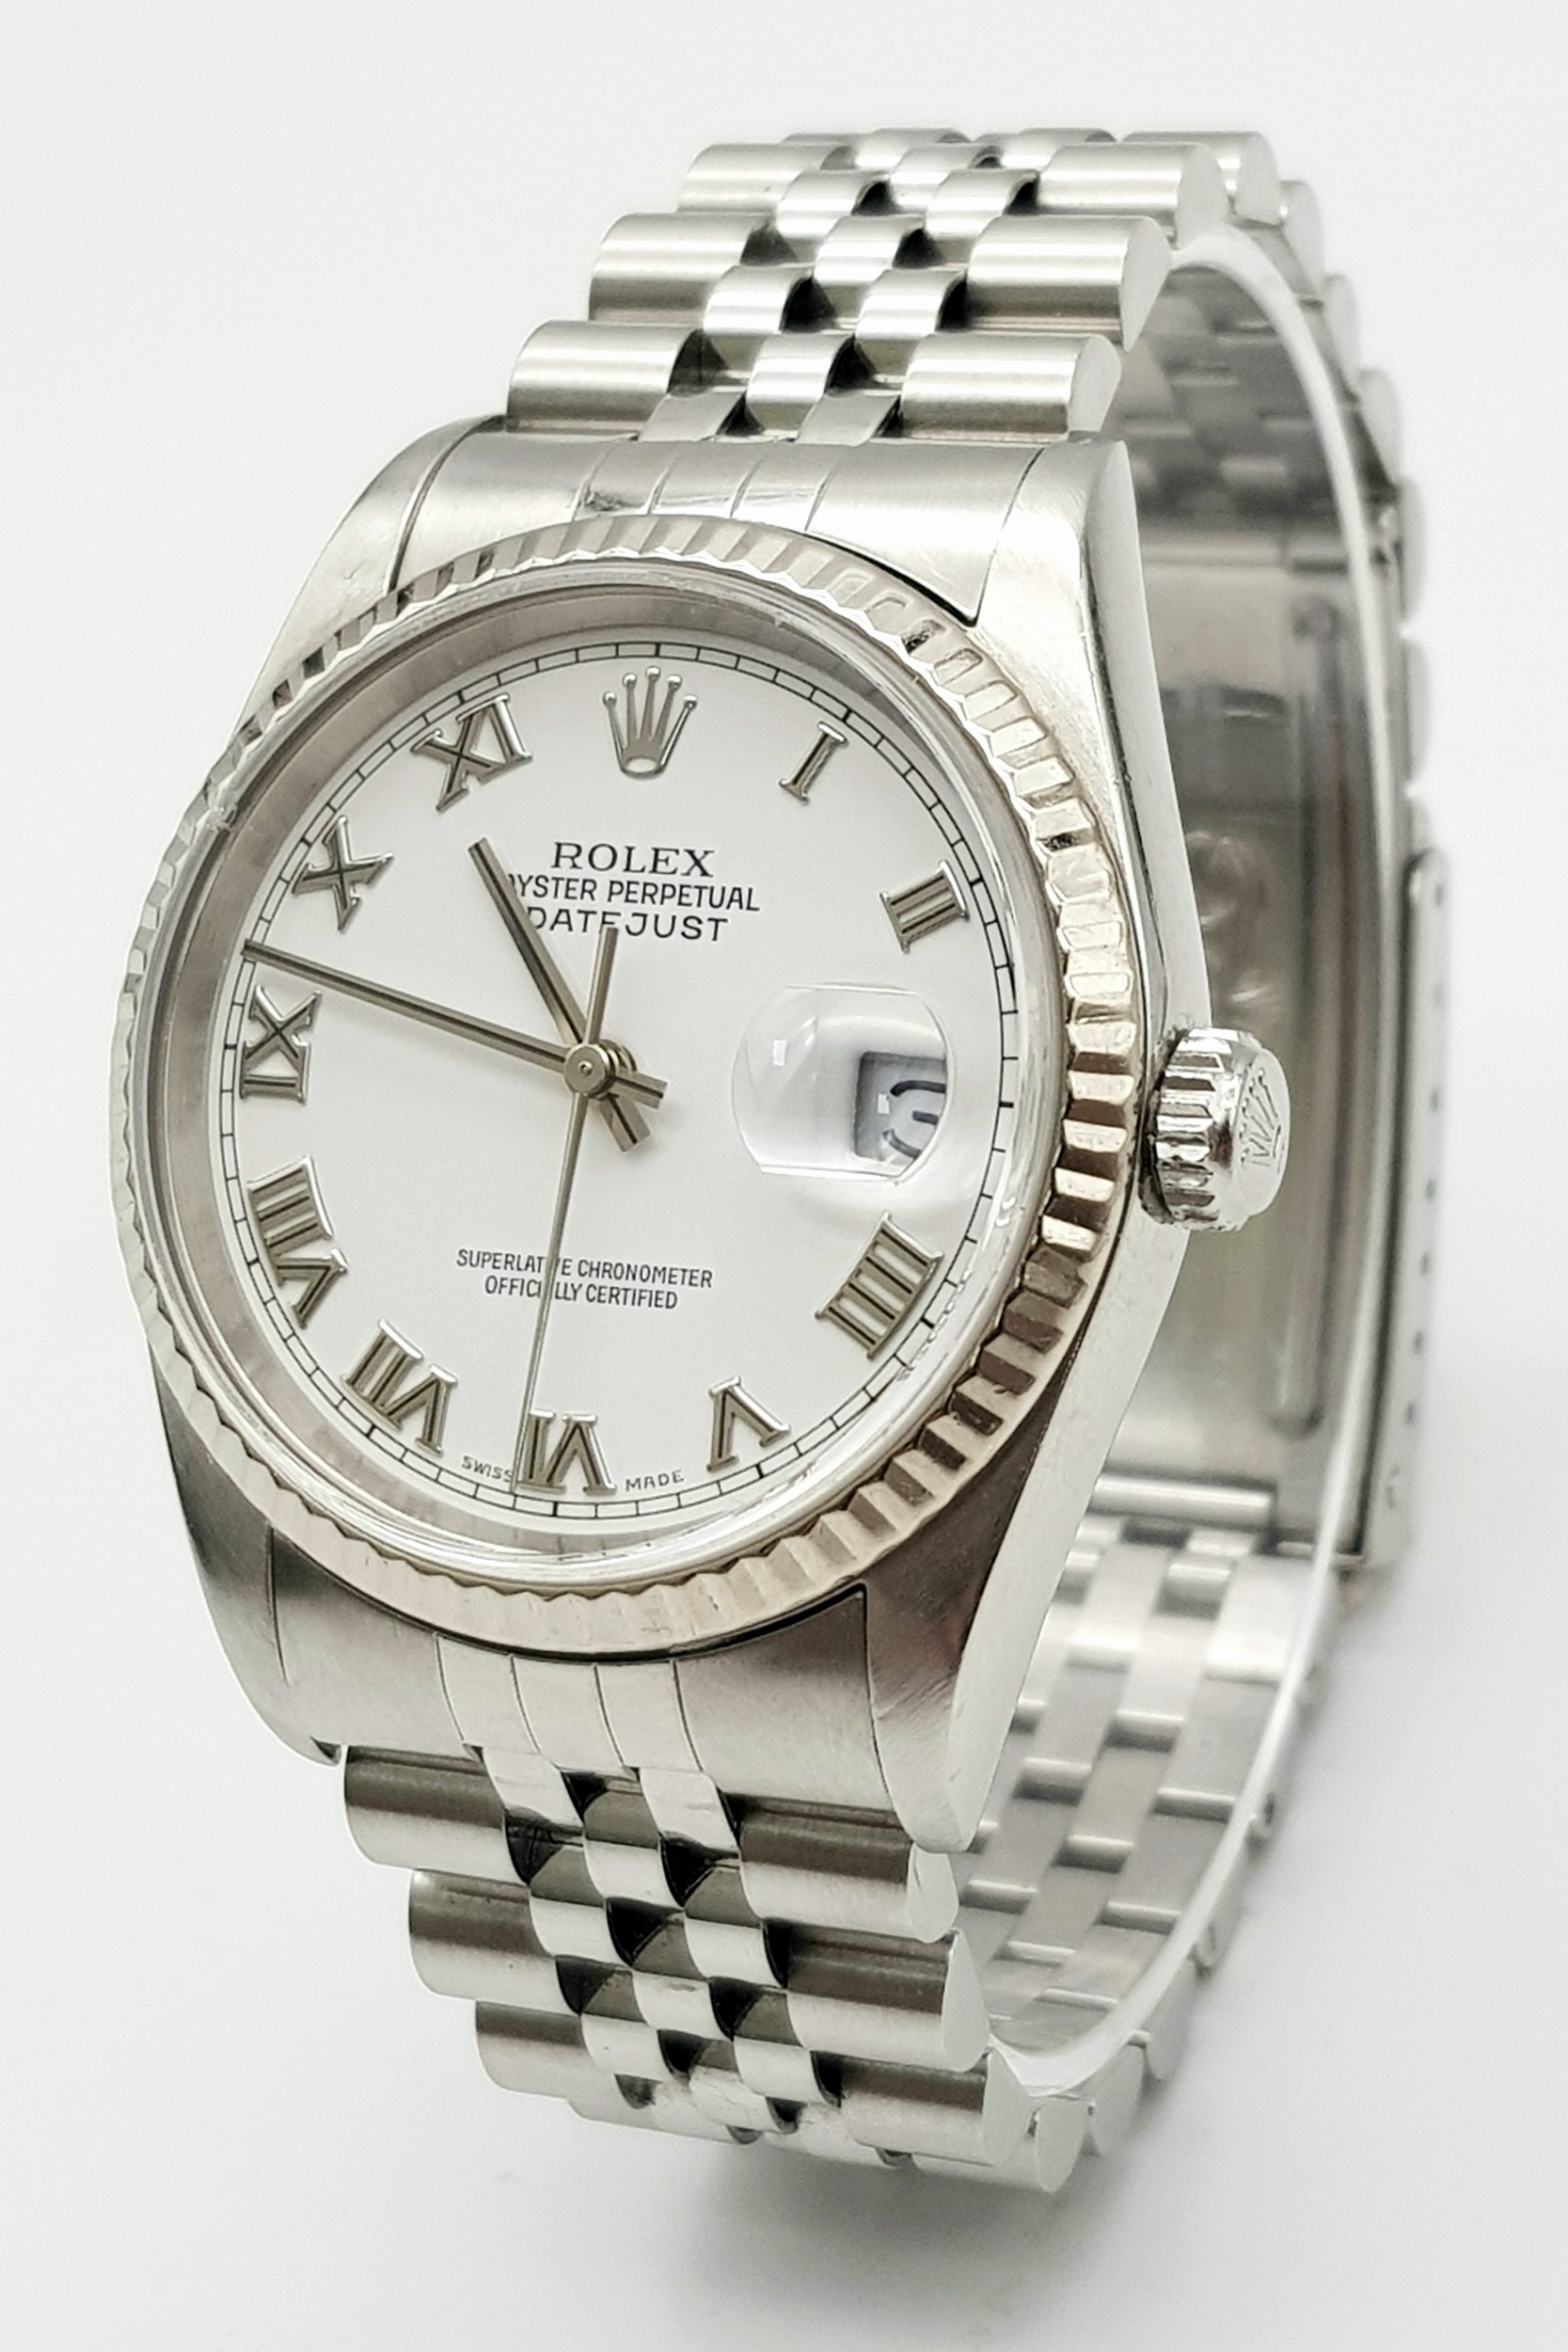 A ROLEX OYSTER PERPETUAL DATEJUST GENTS WATCH IN STAINLESS STEEL WITH WHITE DIAL AND ROMAN